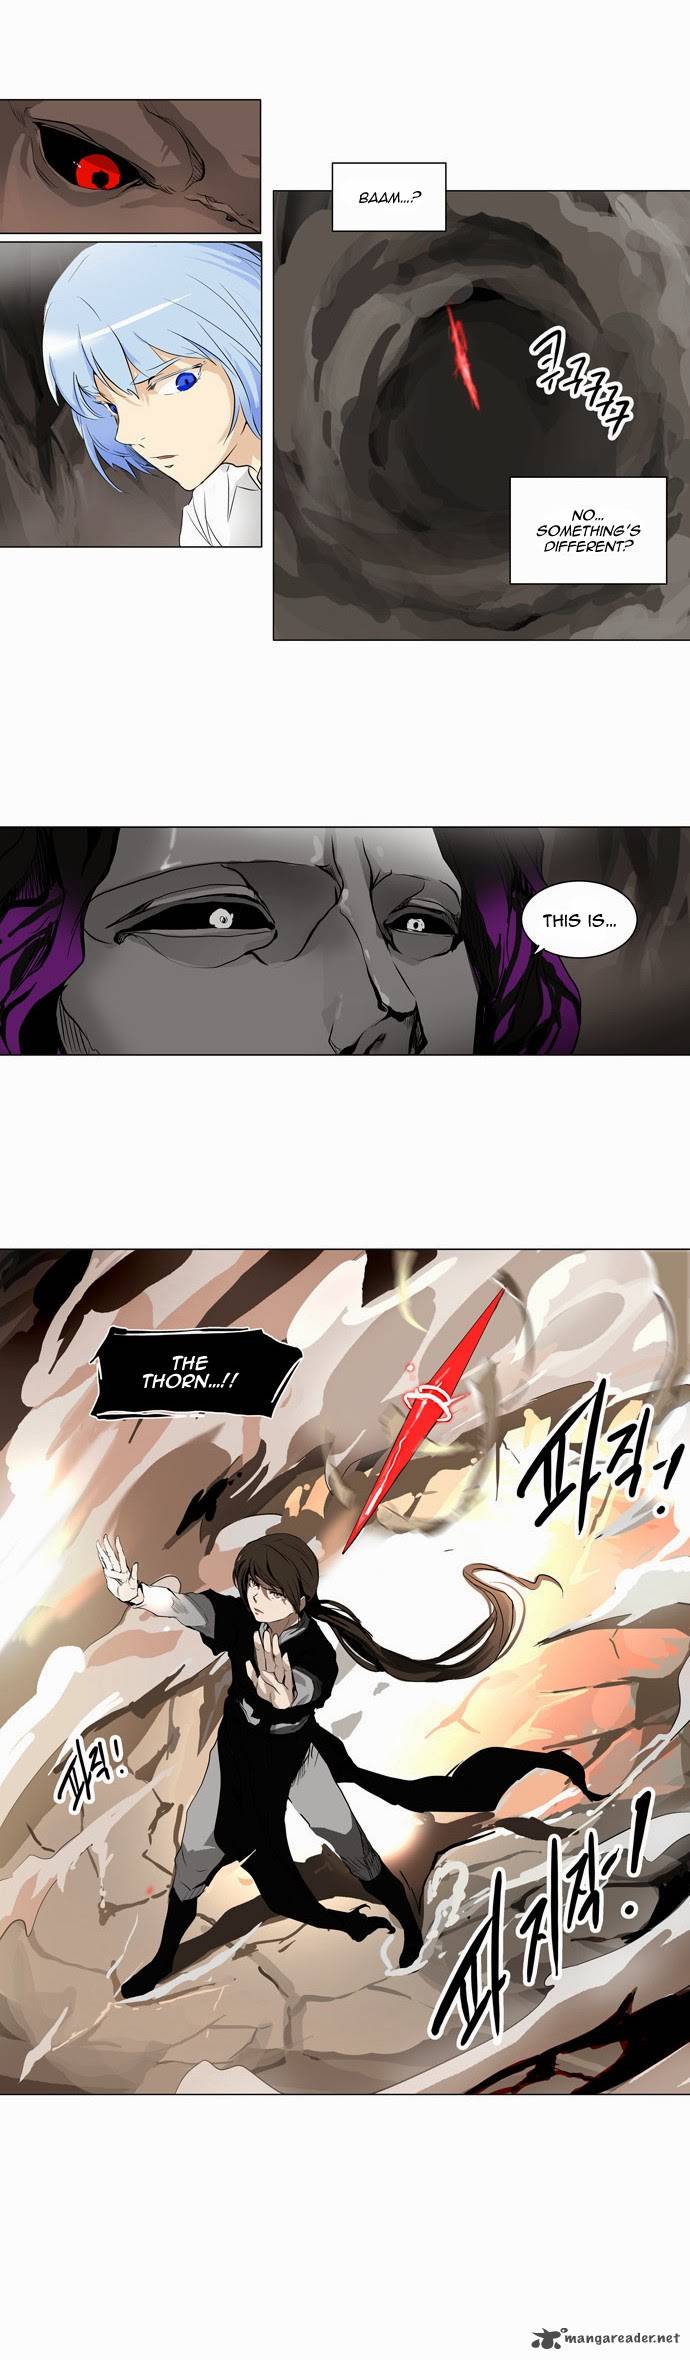 Tower Of God 183 19